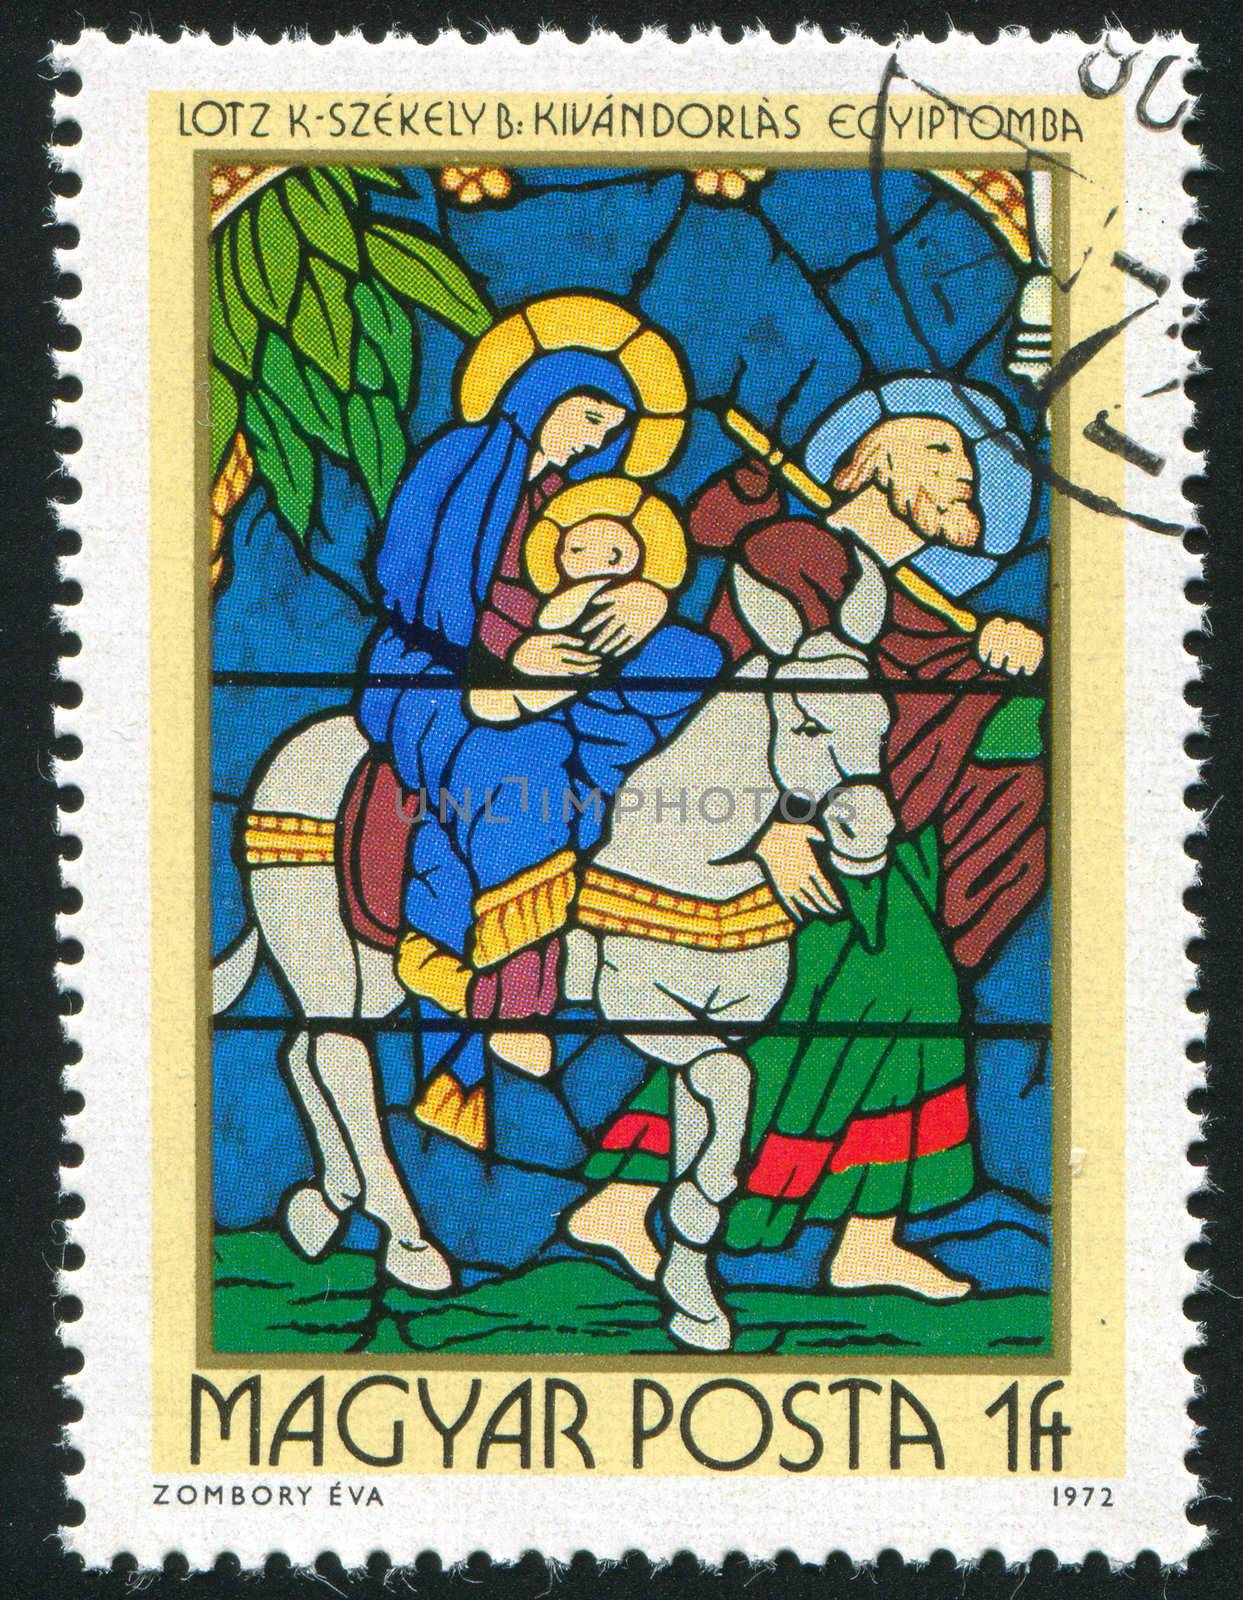 HUNGARY - CIRCA 1972: stamp printed by Hungary, shows Stained-glass Window, Flight into Egypt, by Karoly Lotz and Bertalan Szekely, circa 1972